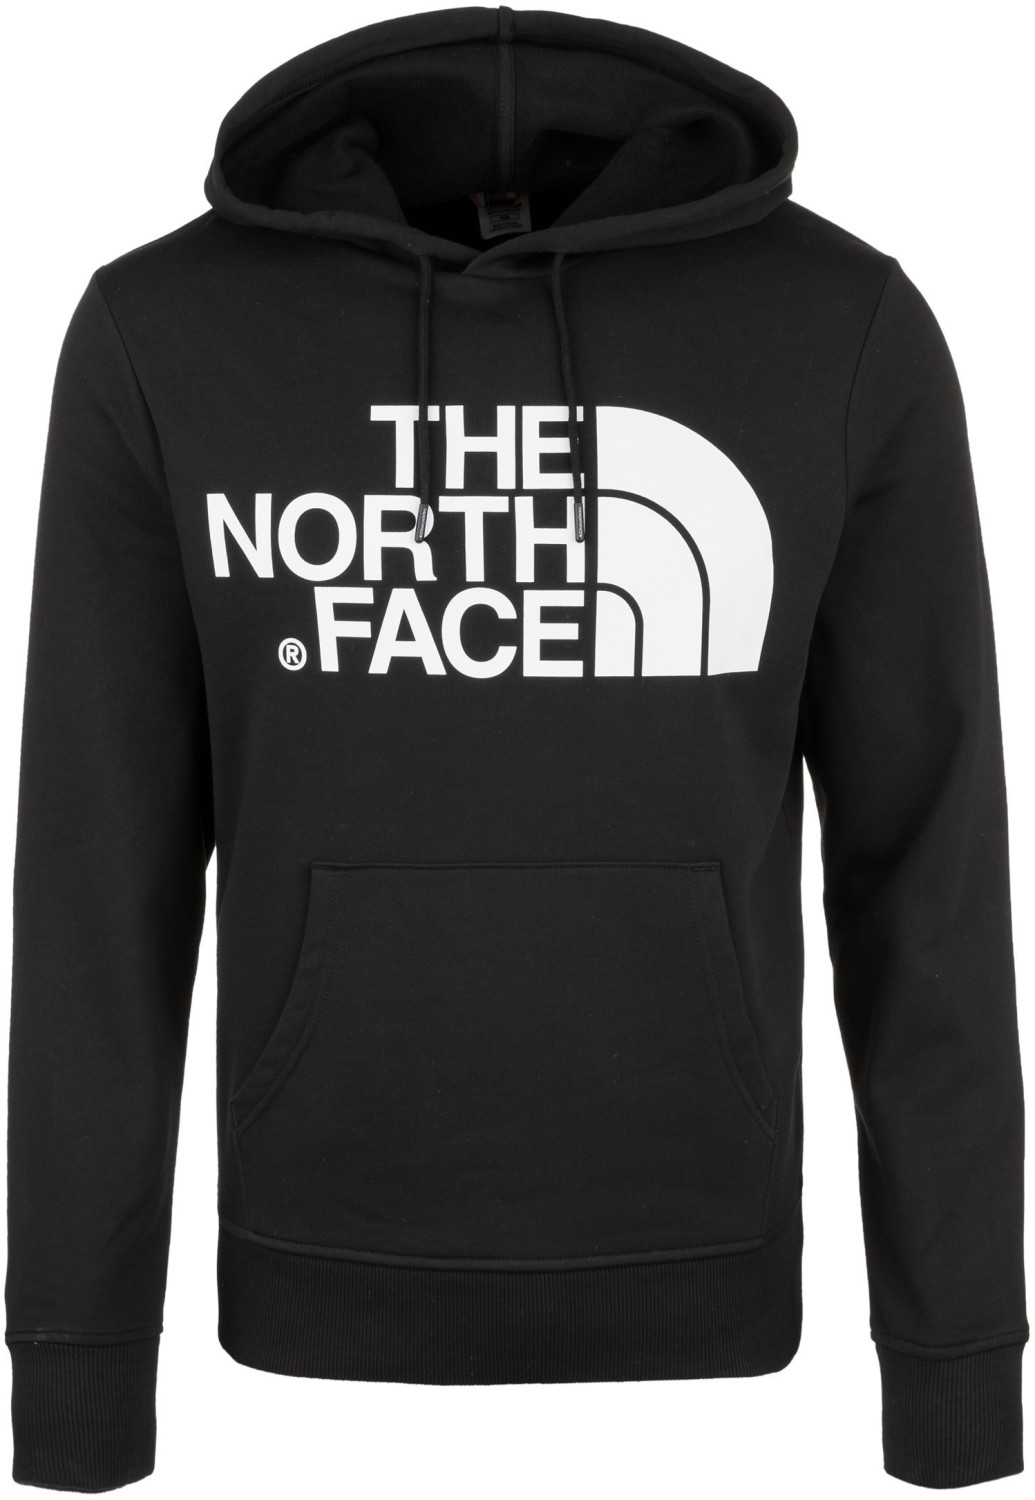 Buy The North Face Men's Standard Hoodie (3XYD) black from £37.50 ...